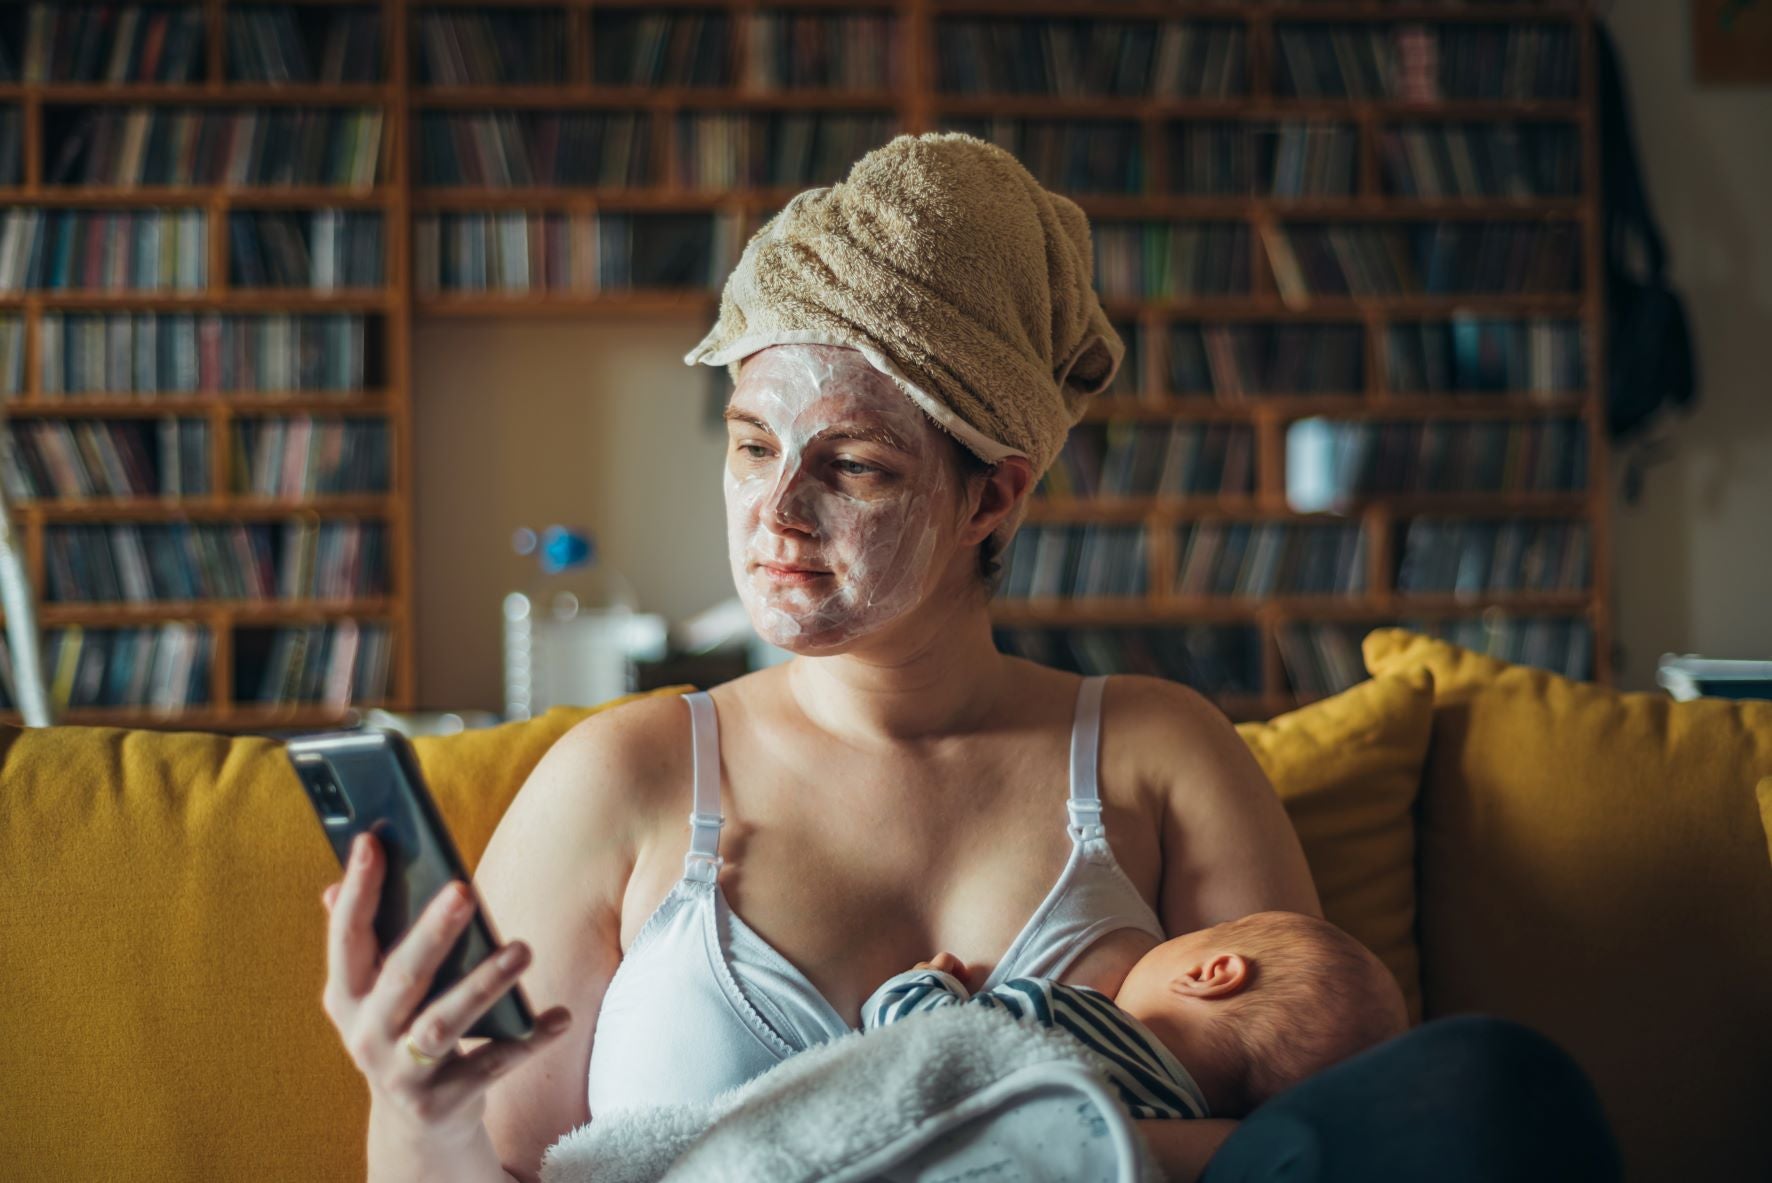 A new mother using her phone and breastfeeding her baby. Concept of breast engorgement, nursing schedule, breastfeeding timings.